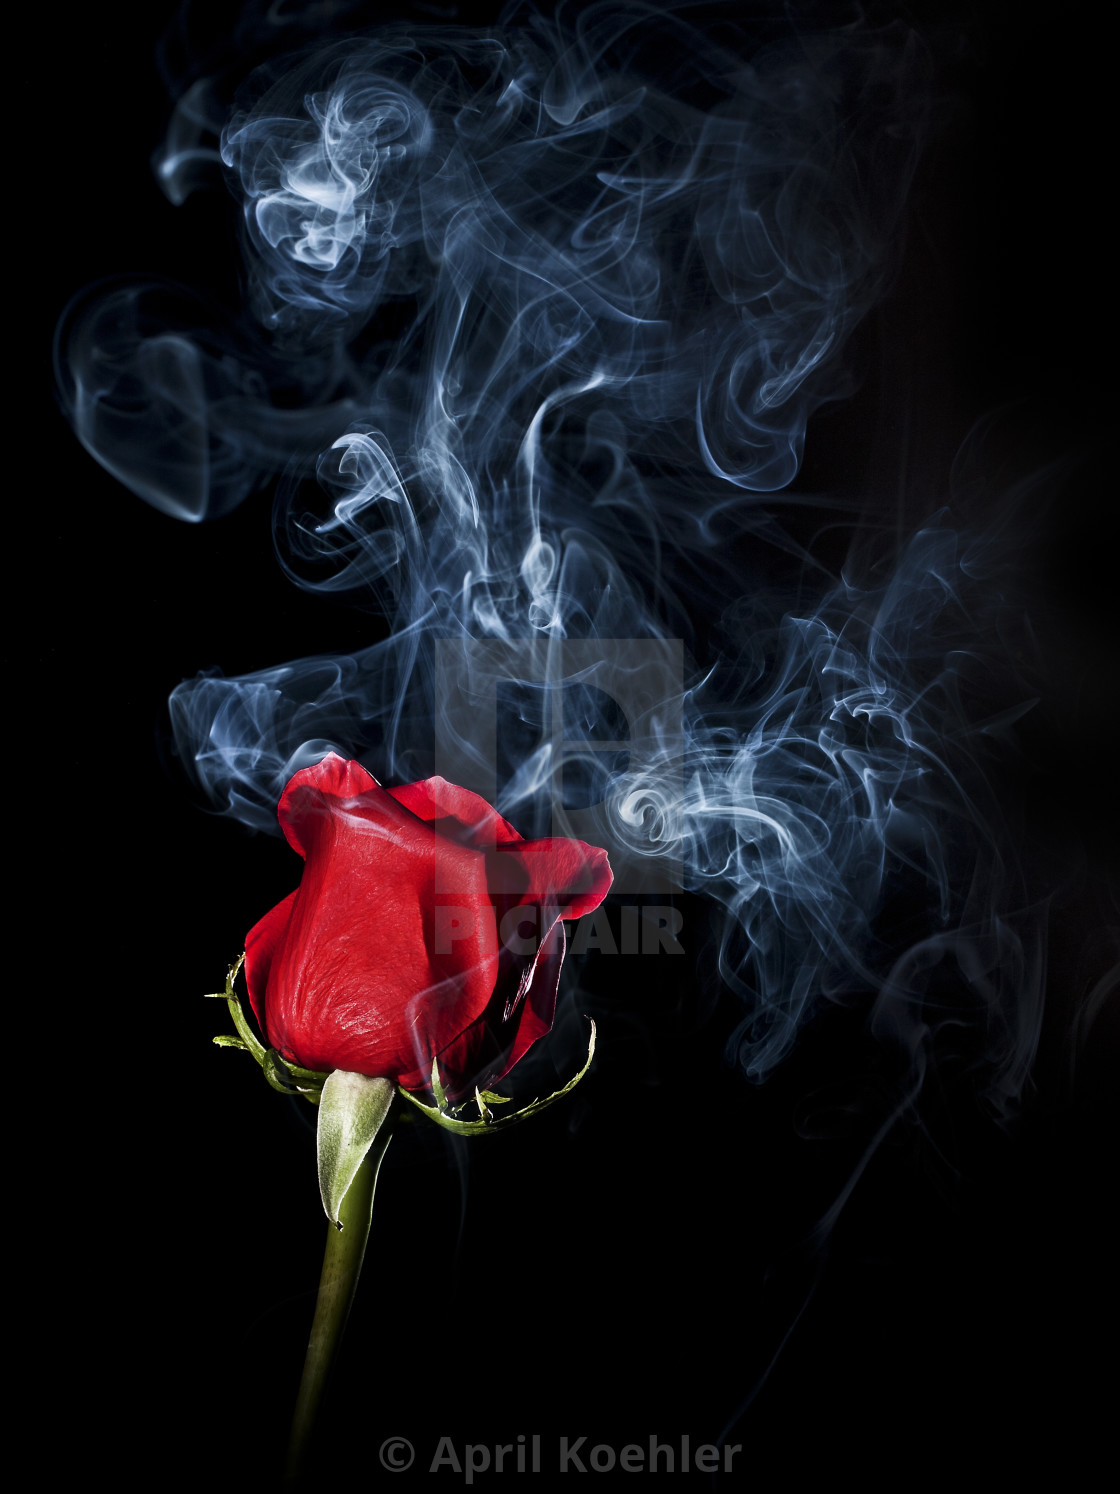 Smoky Rose - License, download or print for £ | Photos | Picfair